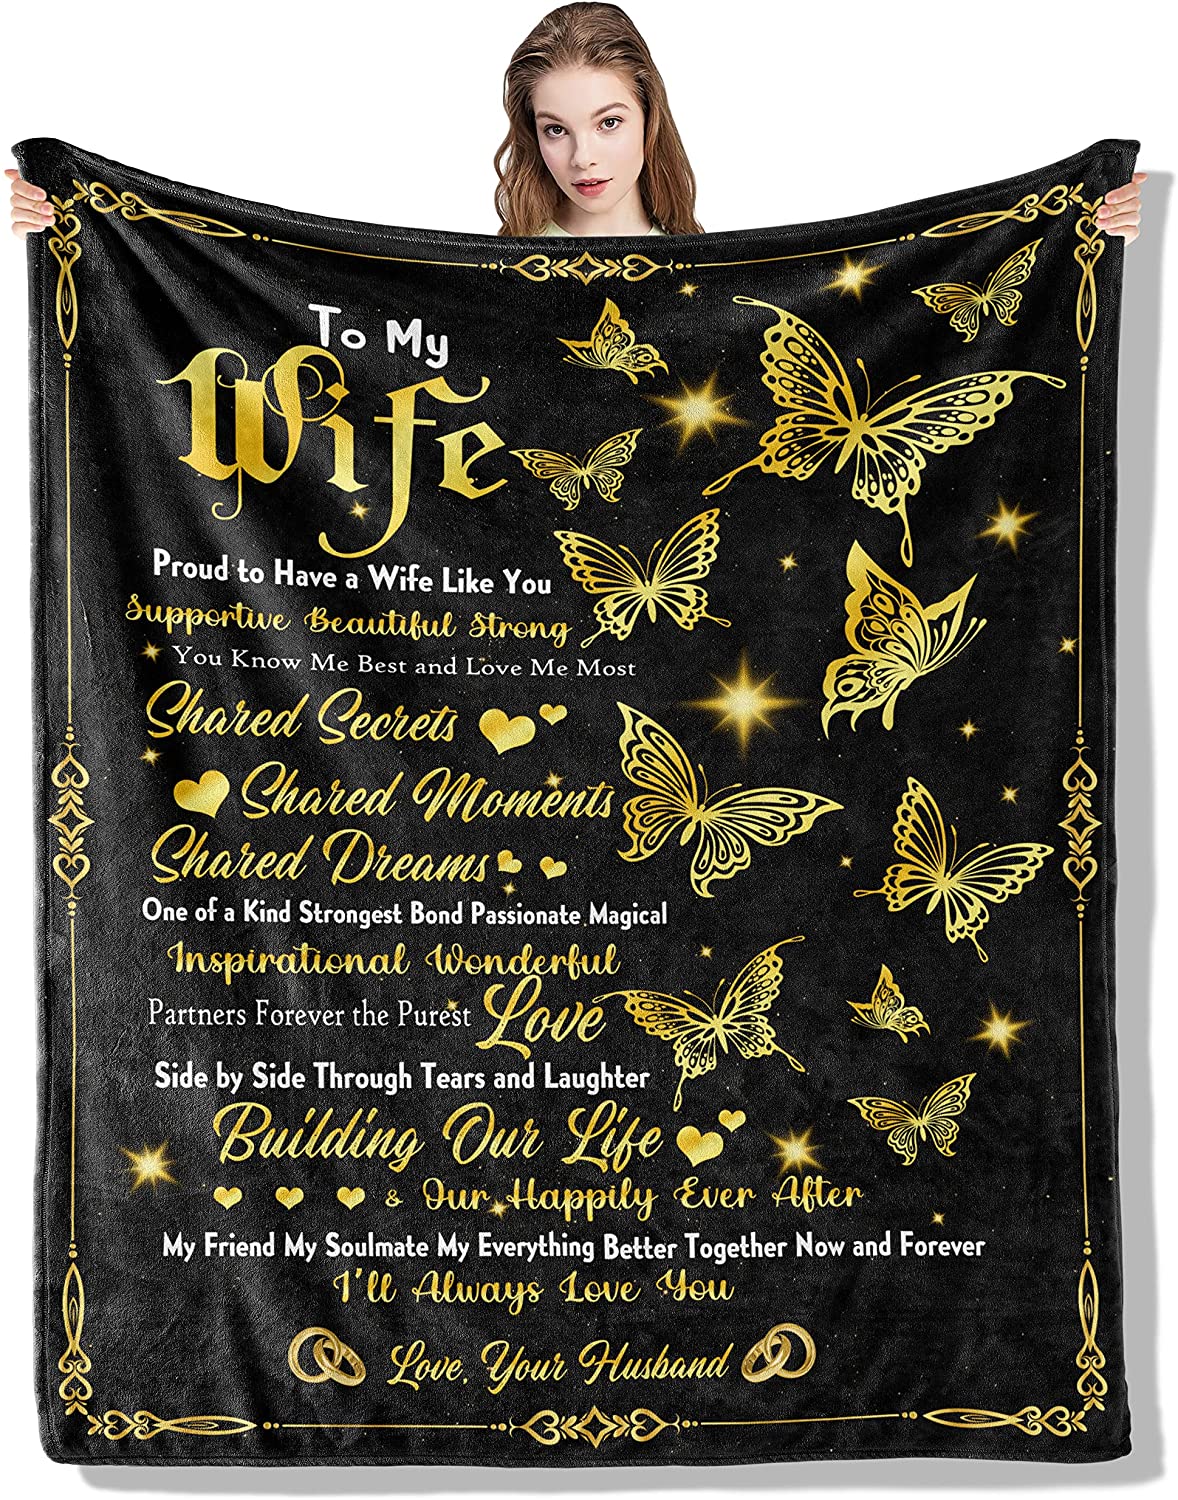 To My Wife Blanket, Wife Gifts Blanket From Husband, Valentine's Day Gifts For Wife, Wife Birthday Gift Ideas - To My Wife Gold Butterfly Blanket